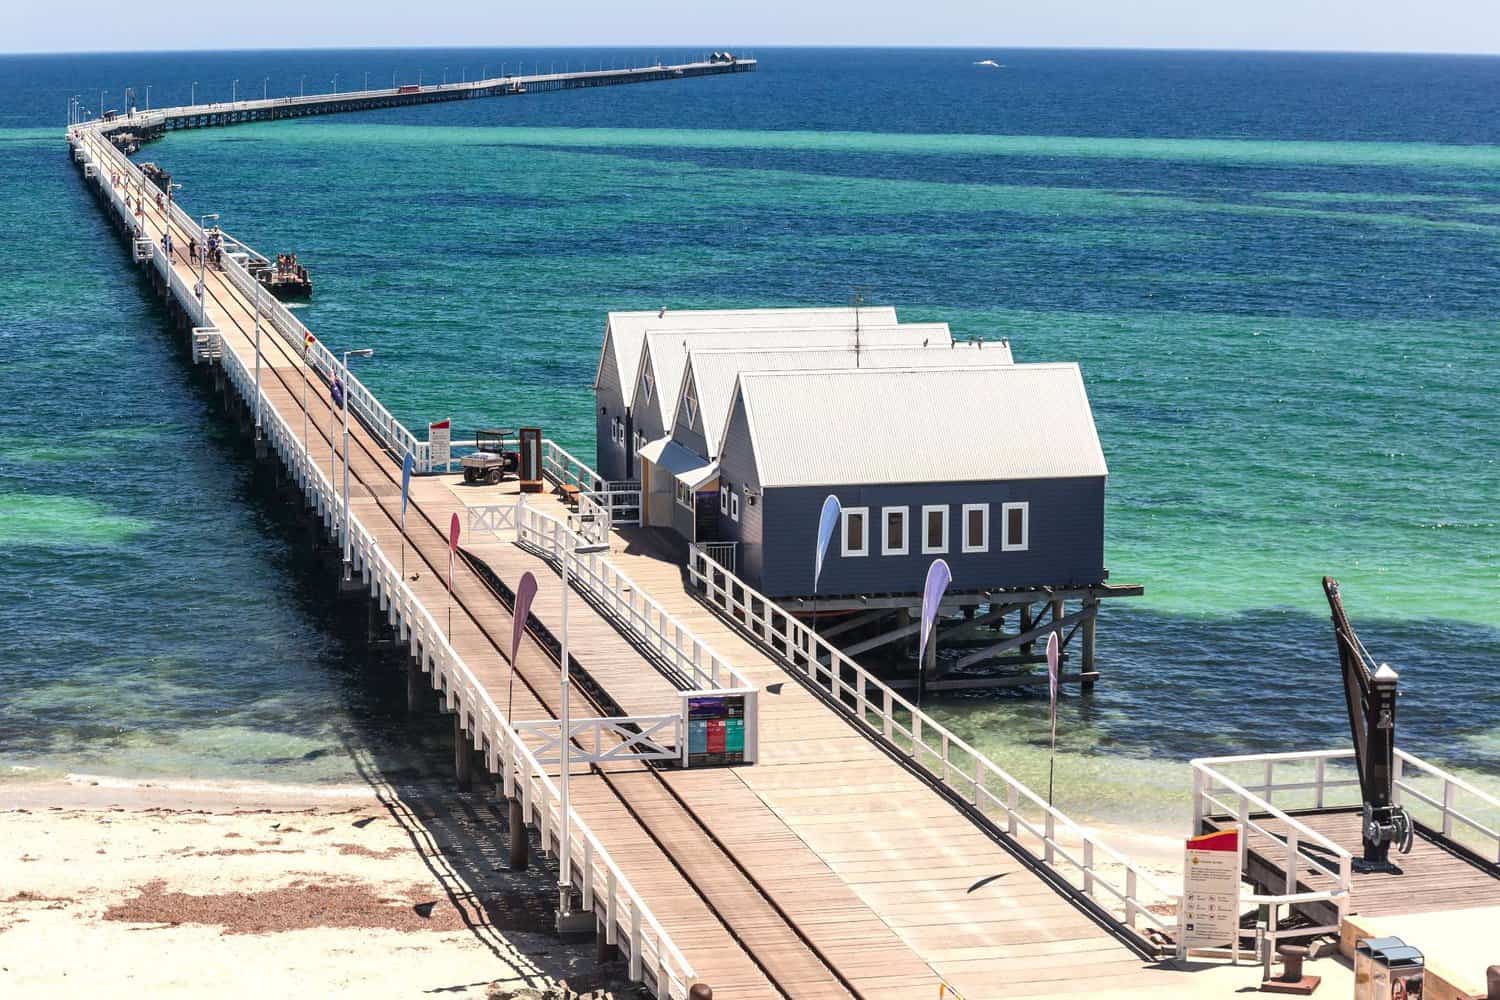 view of Busselton Jetty from the sky